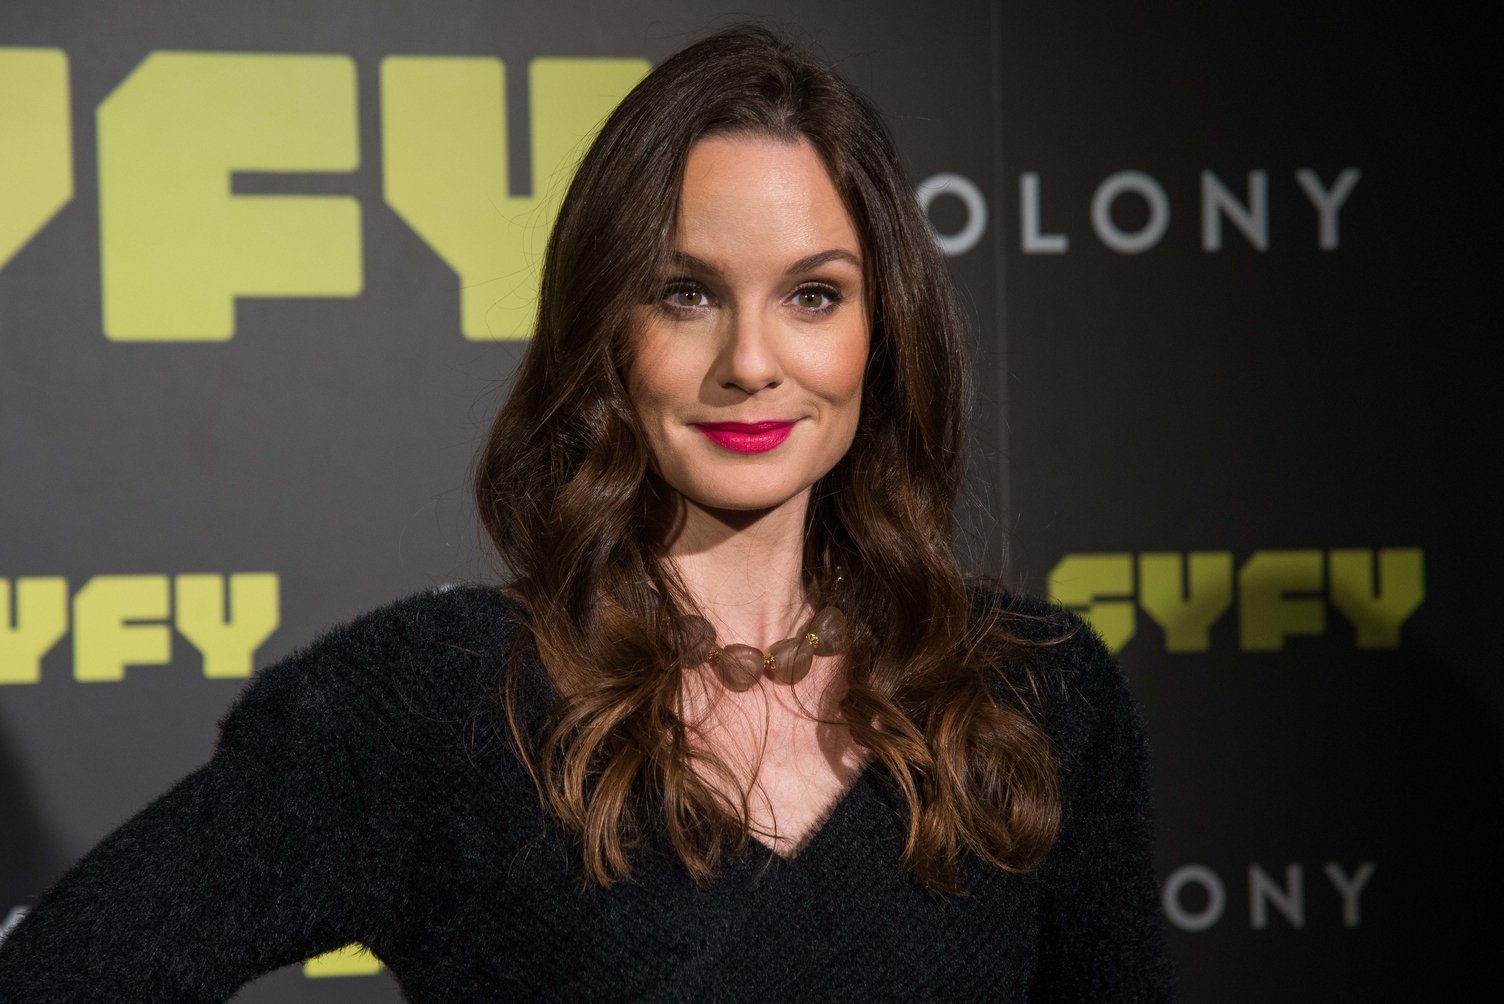 Sarah Wayne Callies attends the 'Colony' Photocall at Santo Mauro Hotel in Madrid on March 8, 2018  | Photo: GettyImages